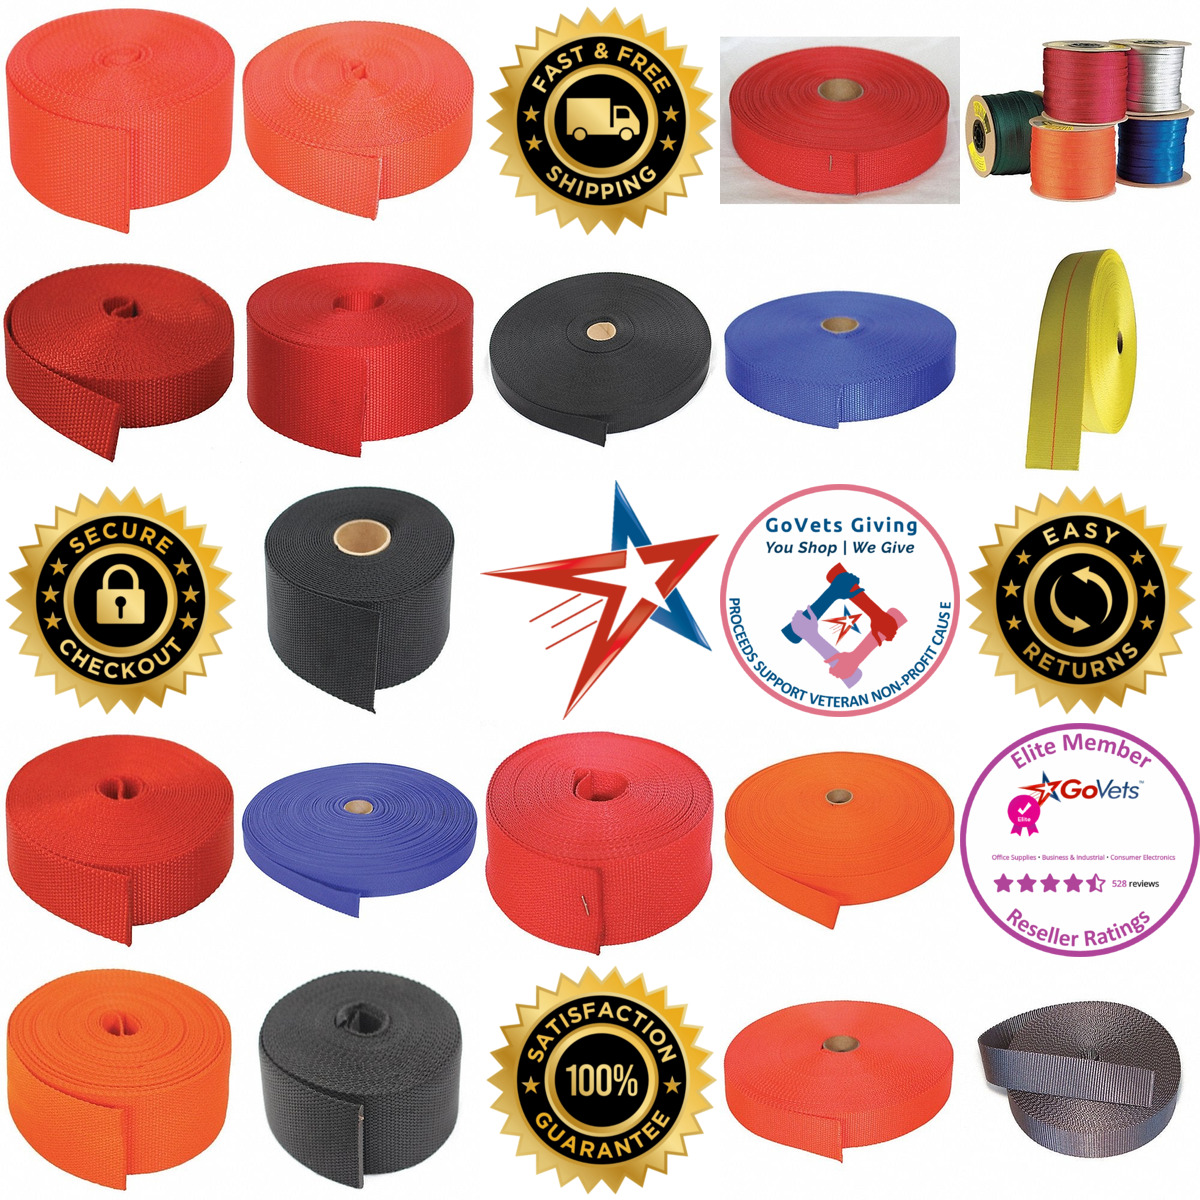 A selection of Bulk Webbing products on GoVets